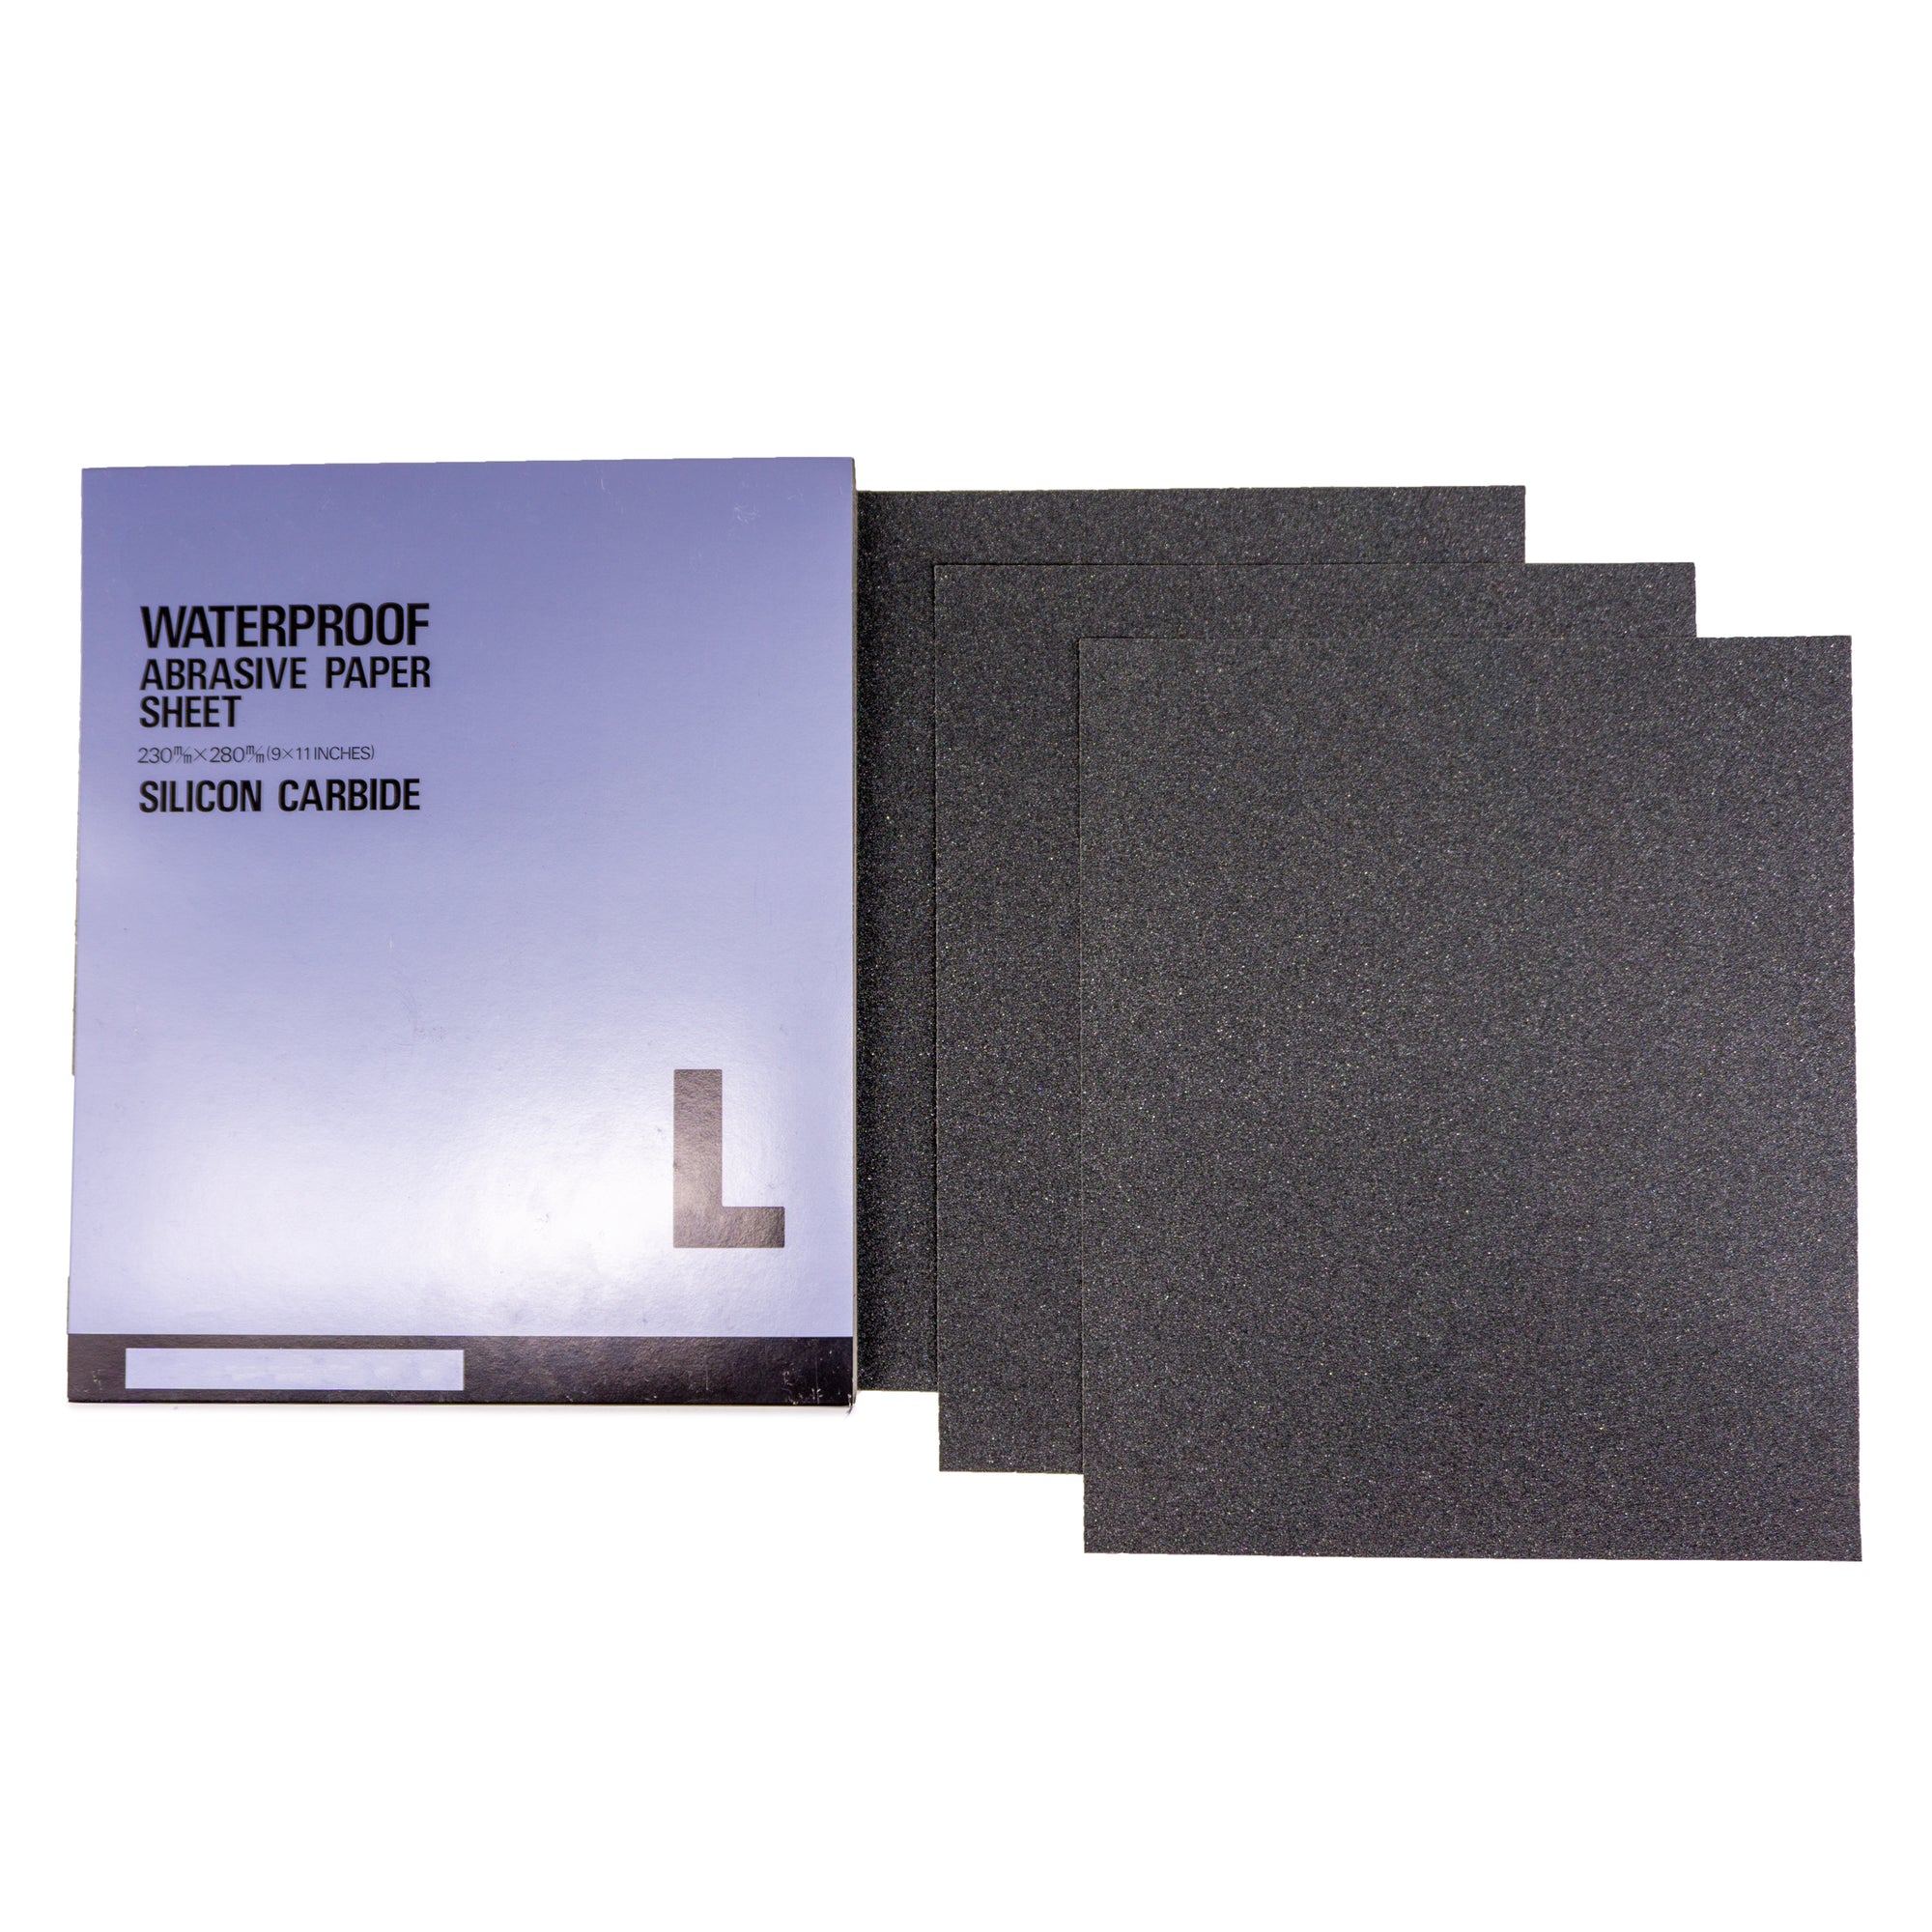 50-pack of 9" x 11" wet/dry sheets for auto body, made with silicon carbide, suitable for versatile wet and dry sanding applications